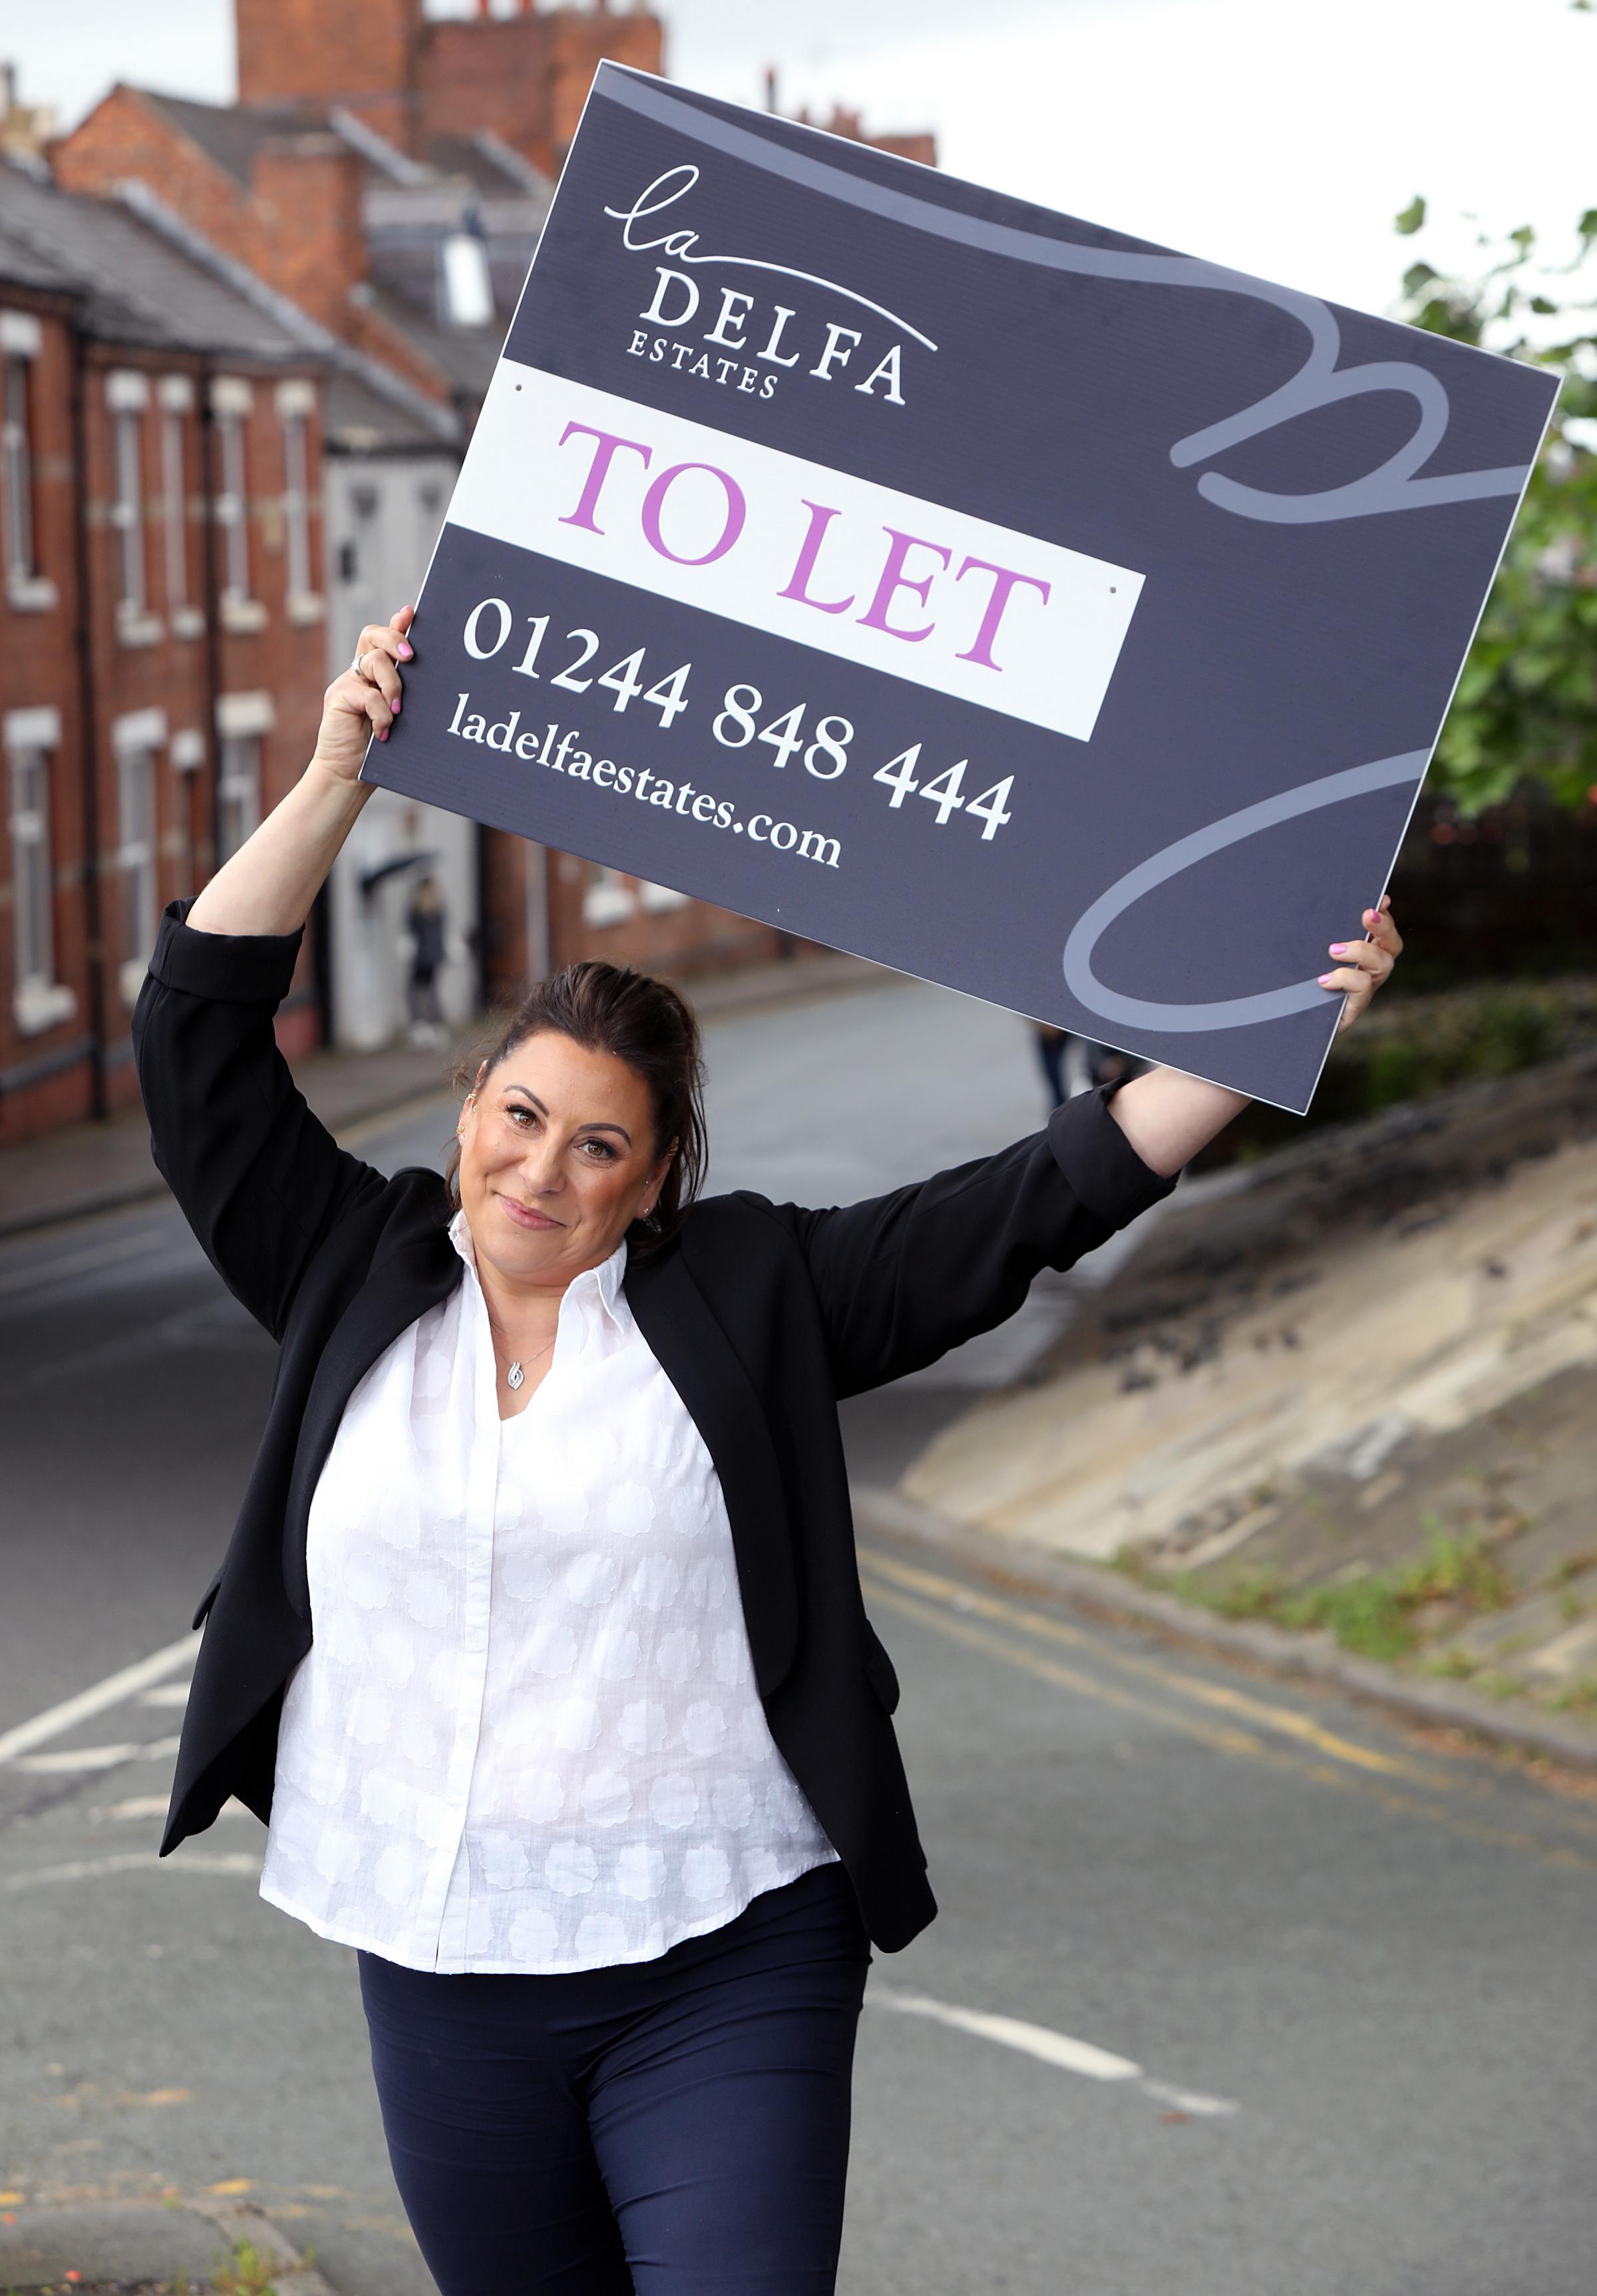 Gaby La Delfa, a former competitive body builder who was once fifth best in the UK, has set up her own property company, La Delfa Estates on Garden Lane in Chester. Photo: Ian Cooper Photography.